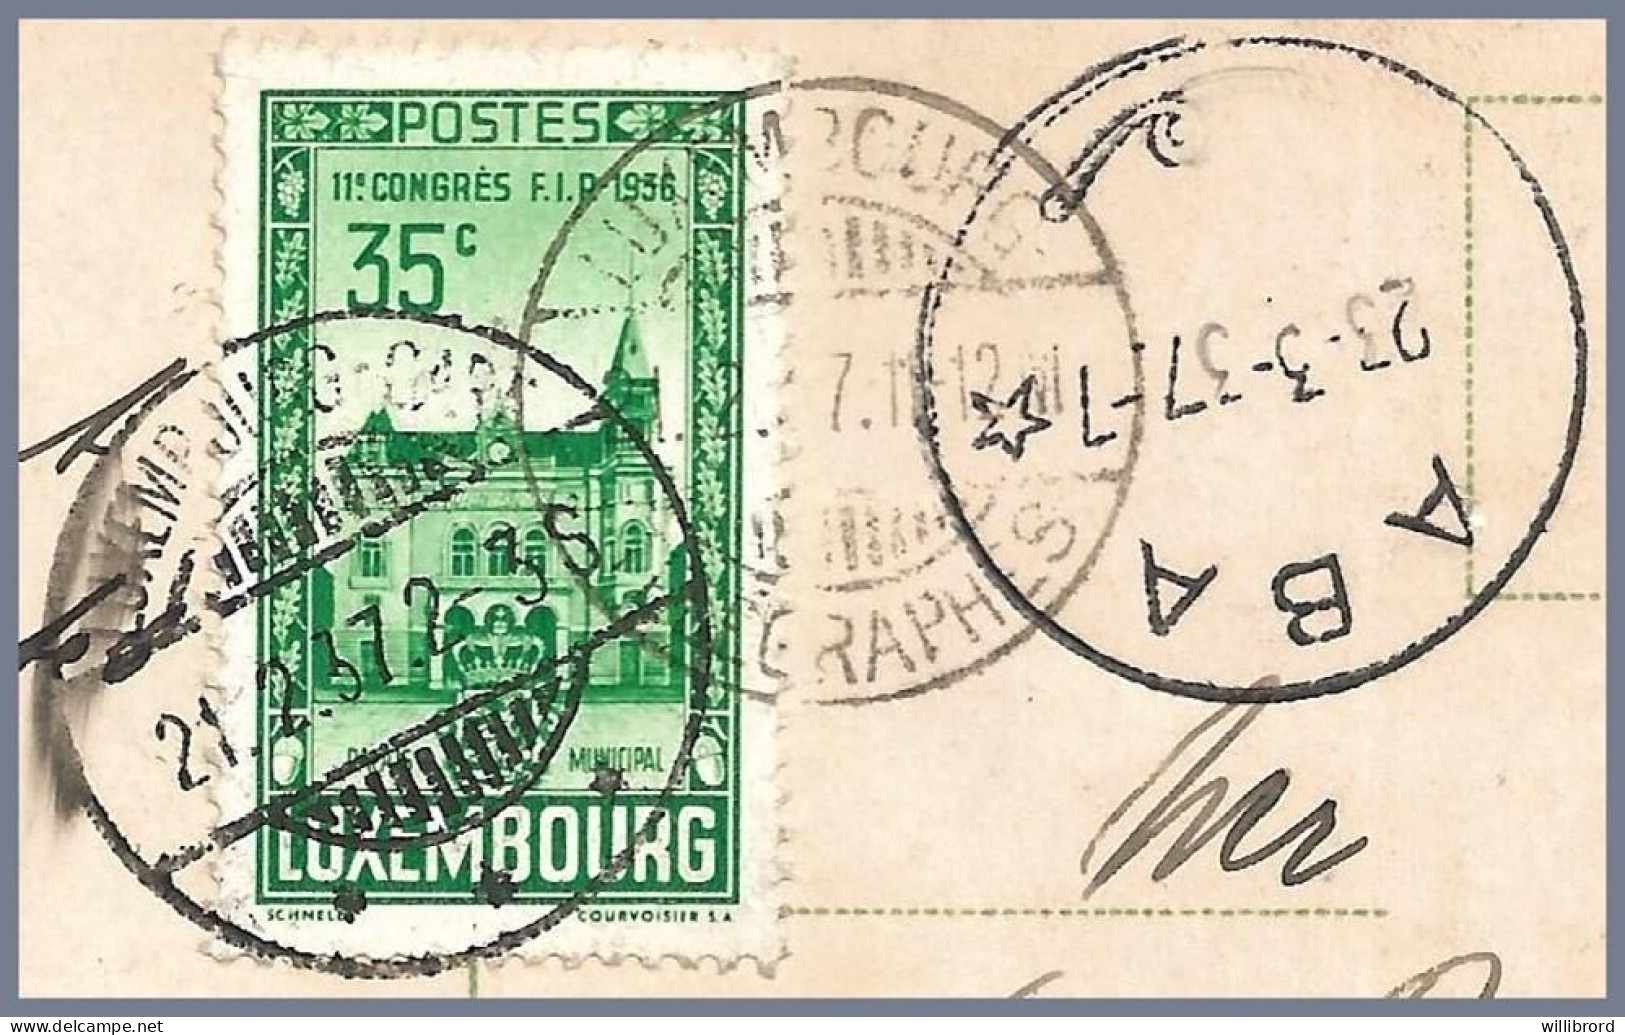 LUXEMBOURG TÉLÉGRAPHES - 1937 To BELGIAN CONGO - 35c FIP Congress Sole Use On Postcard - Covers & Documents